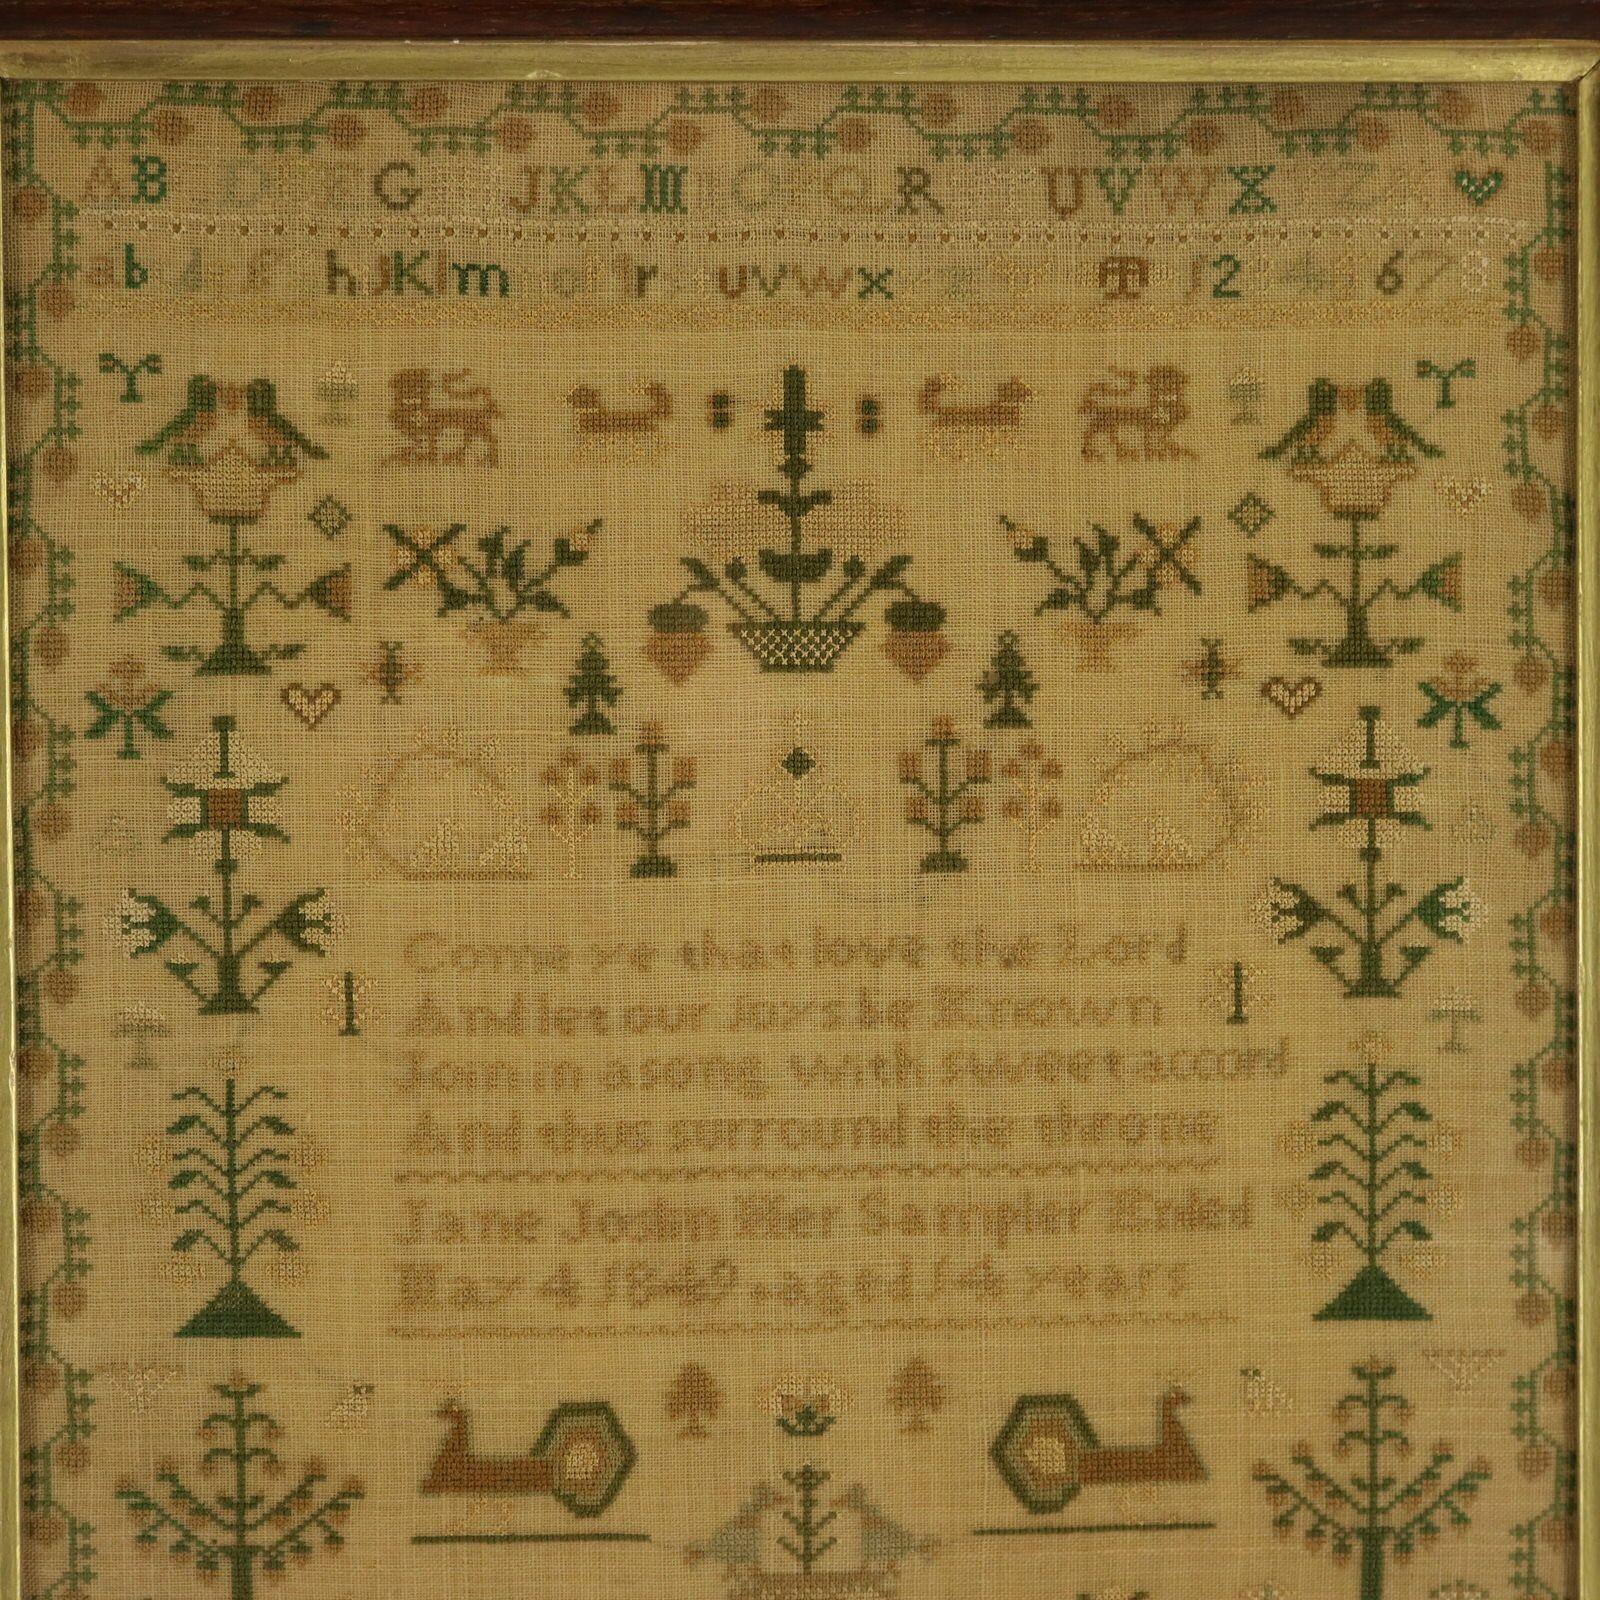 Victorian Sampler, 1849, by Jane Joslin. The sampler is worked in silk on a linen ground, mainly in cross stitch. Meandering strawberry border. Colours gold, pale blue, light brown, copper, green and silver. Alphabets A-Z in upper case and lower